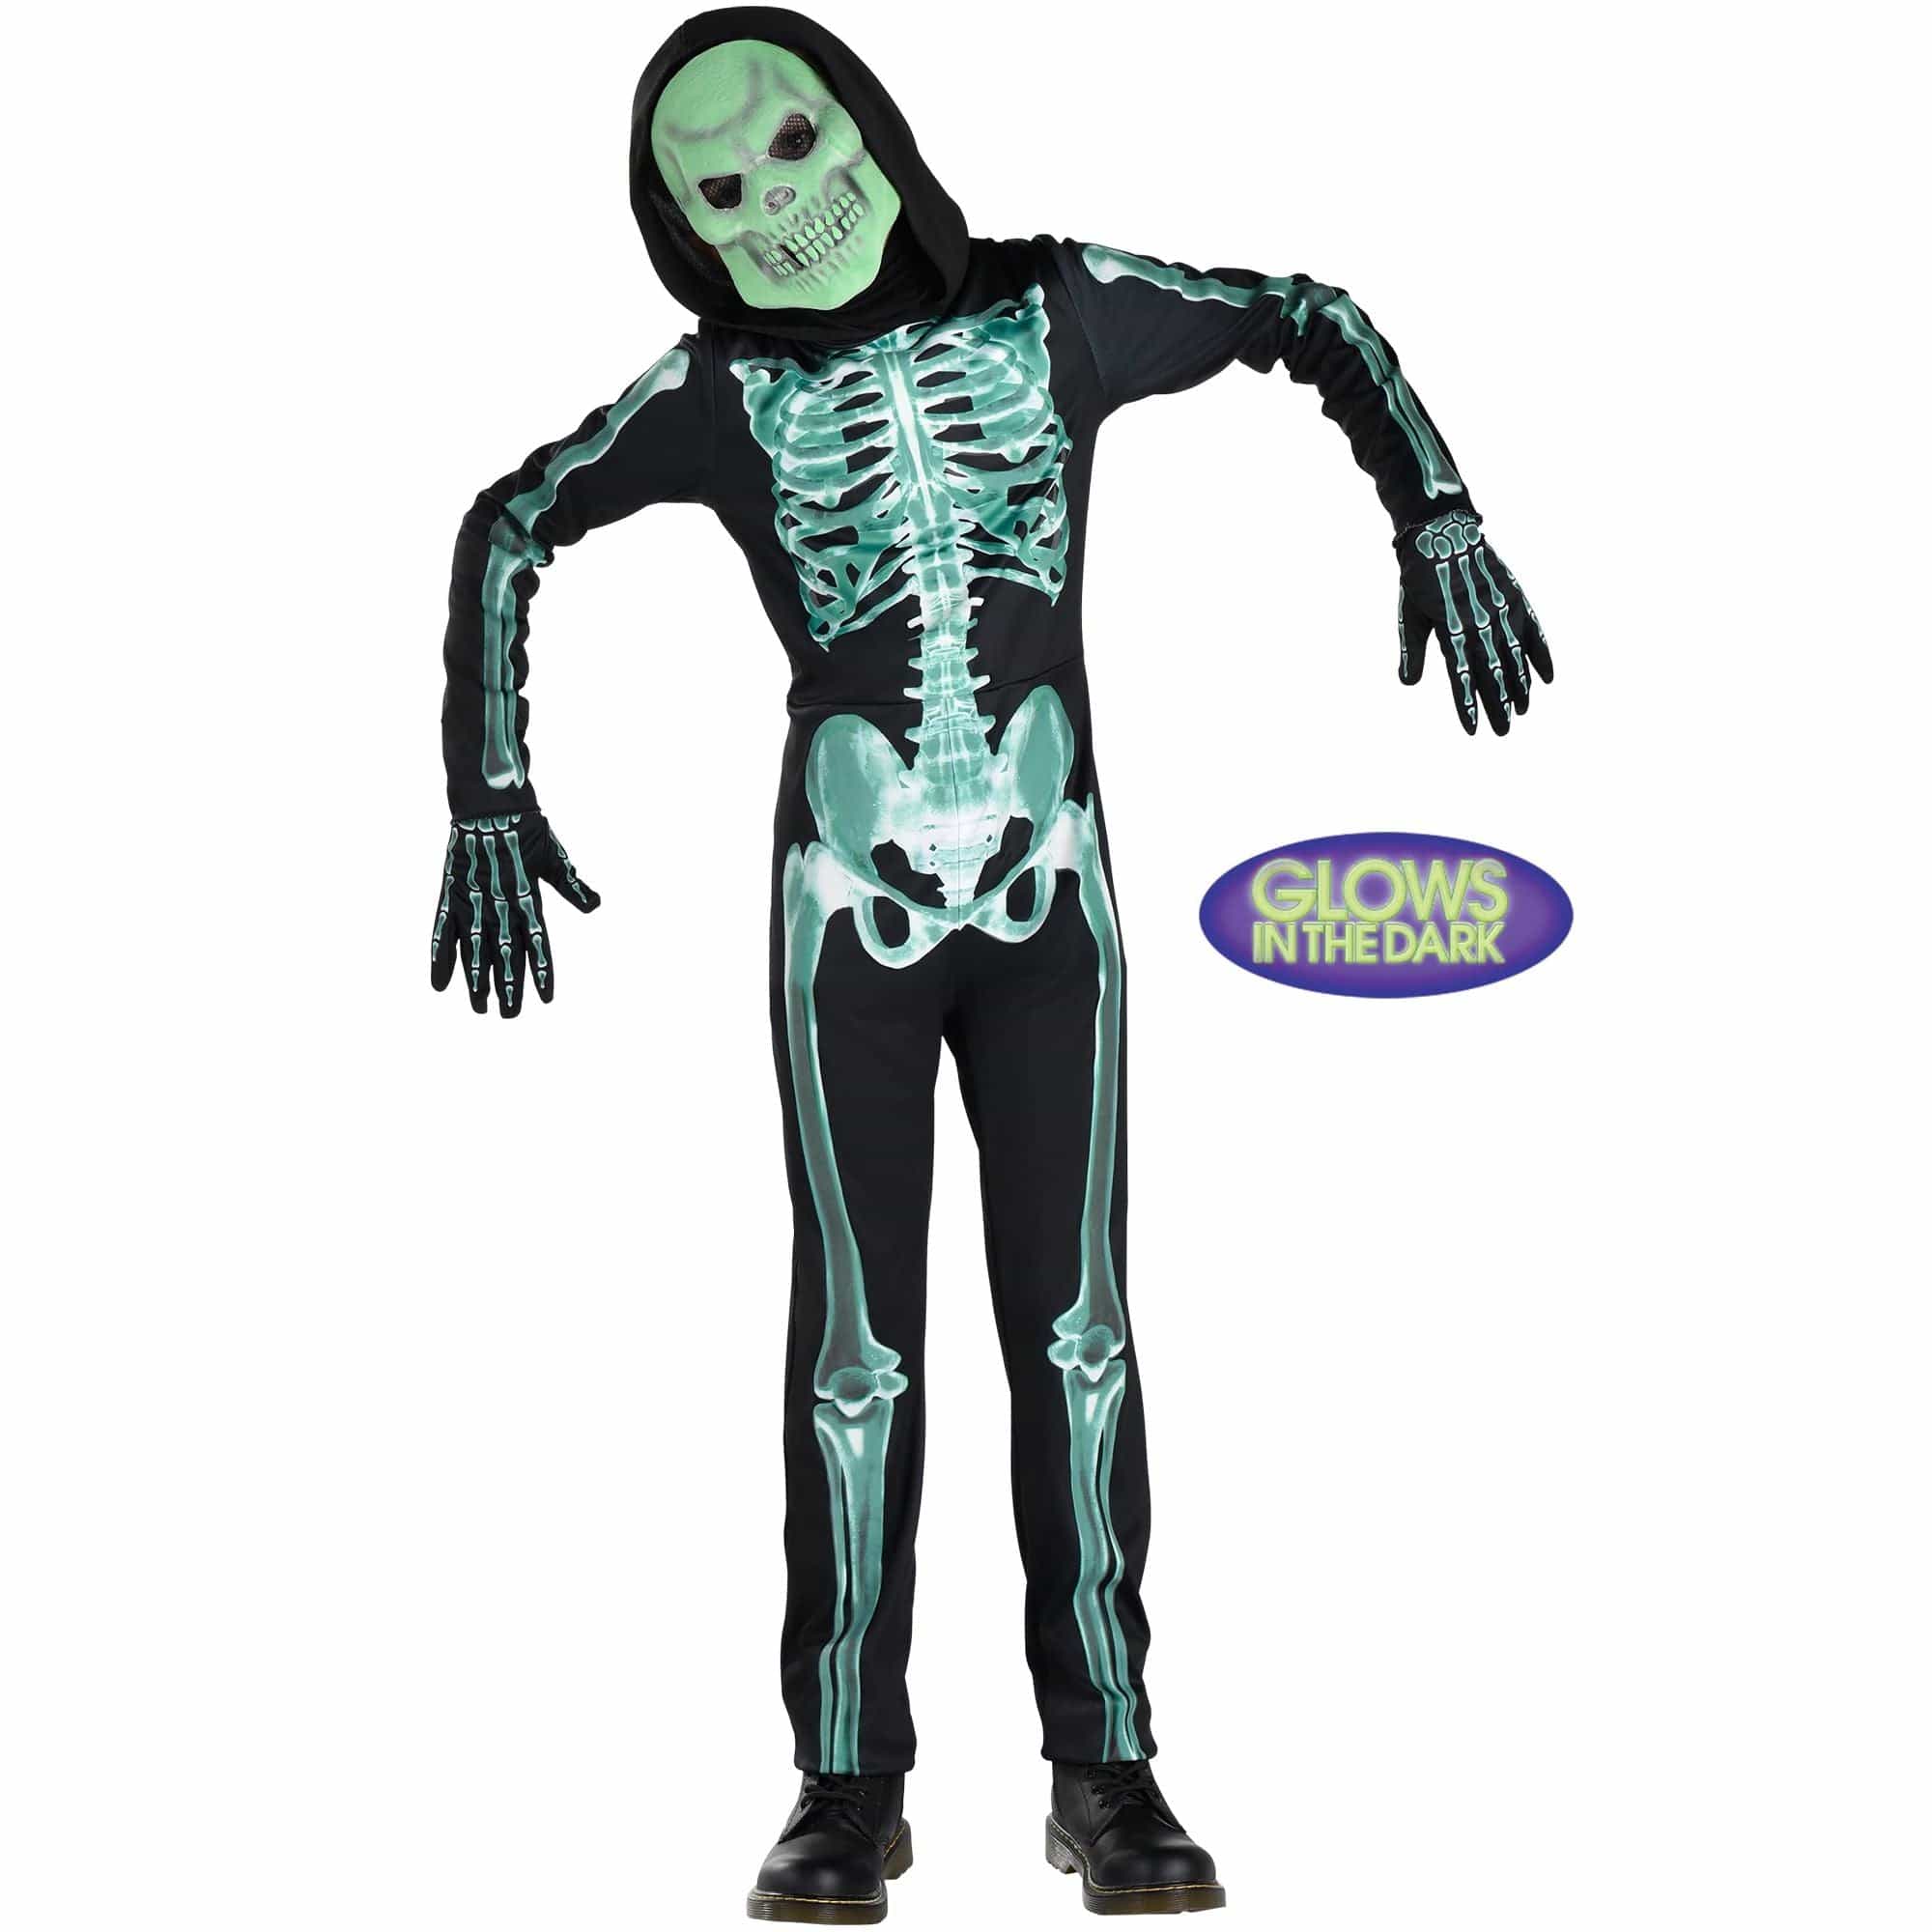 Amscan COSTUMES Small (4-6) Childs Glow in the Dark Skeleton Costume